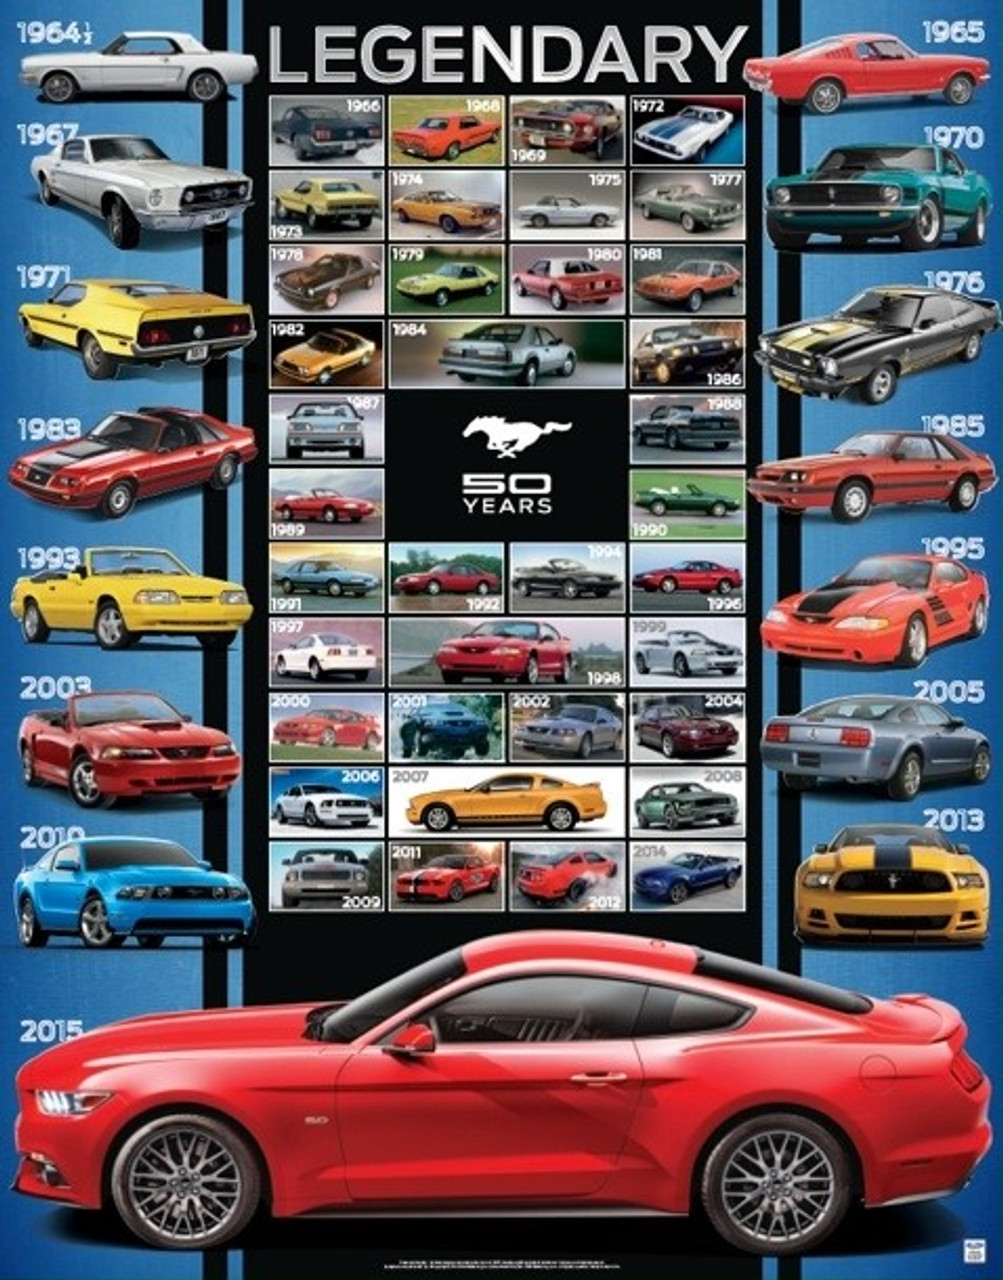 Ford Mustang "Legendary" 50th Anniversary Poster